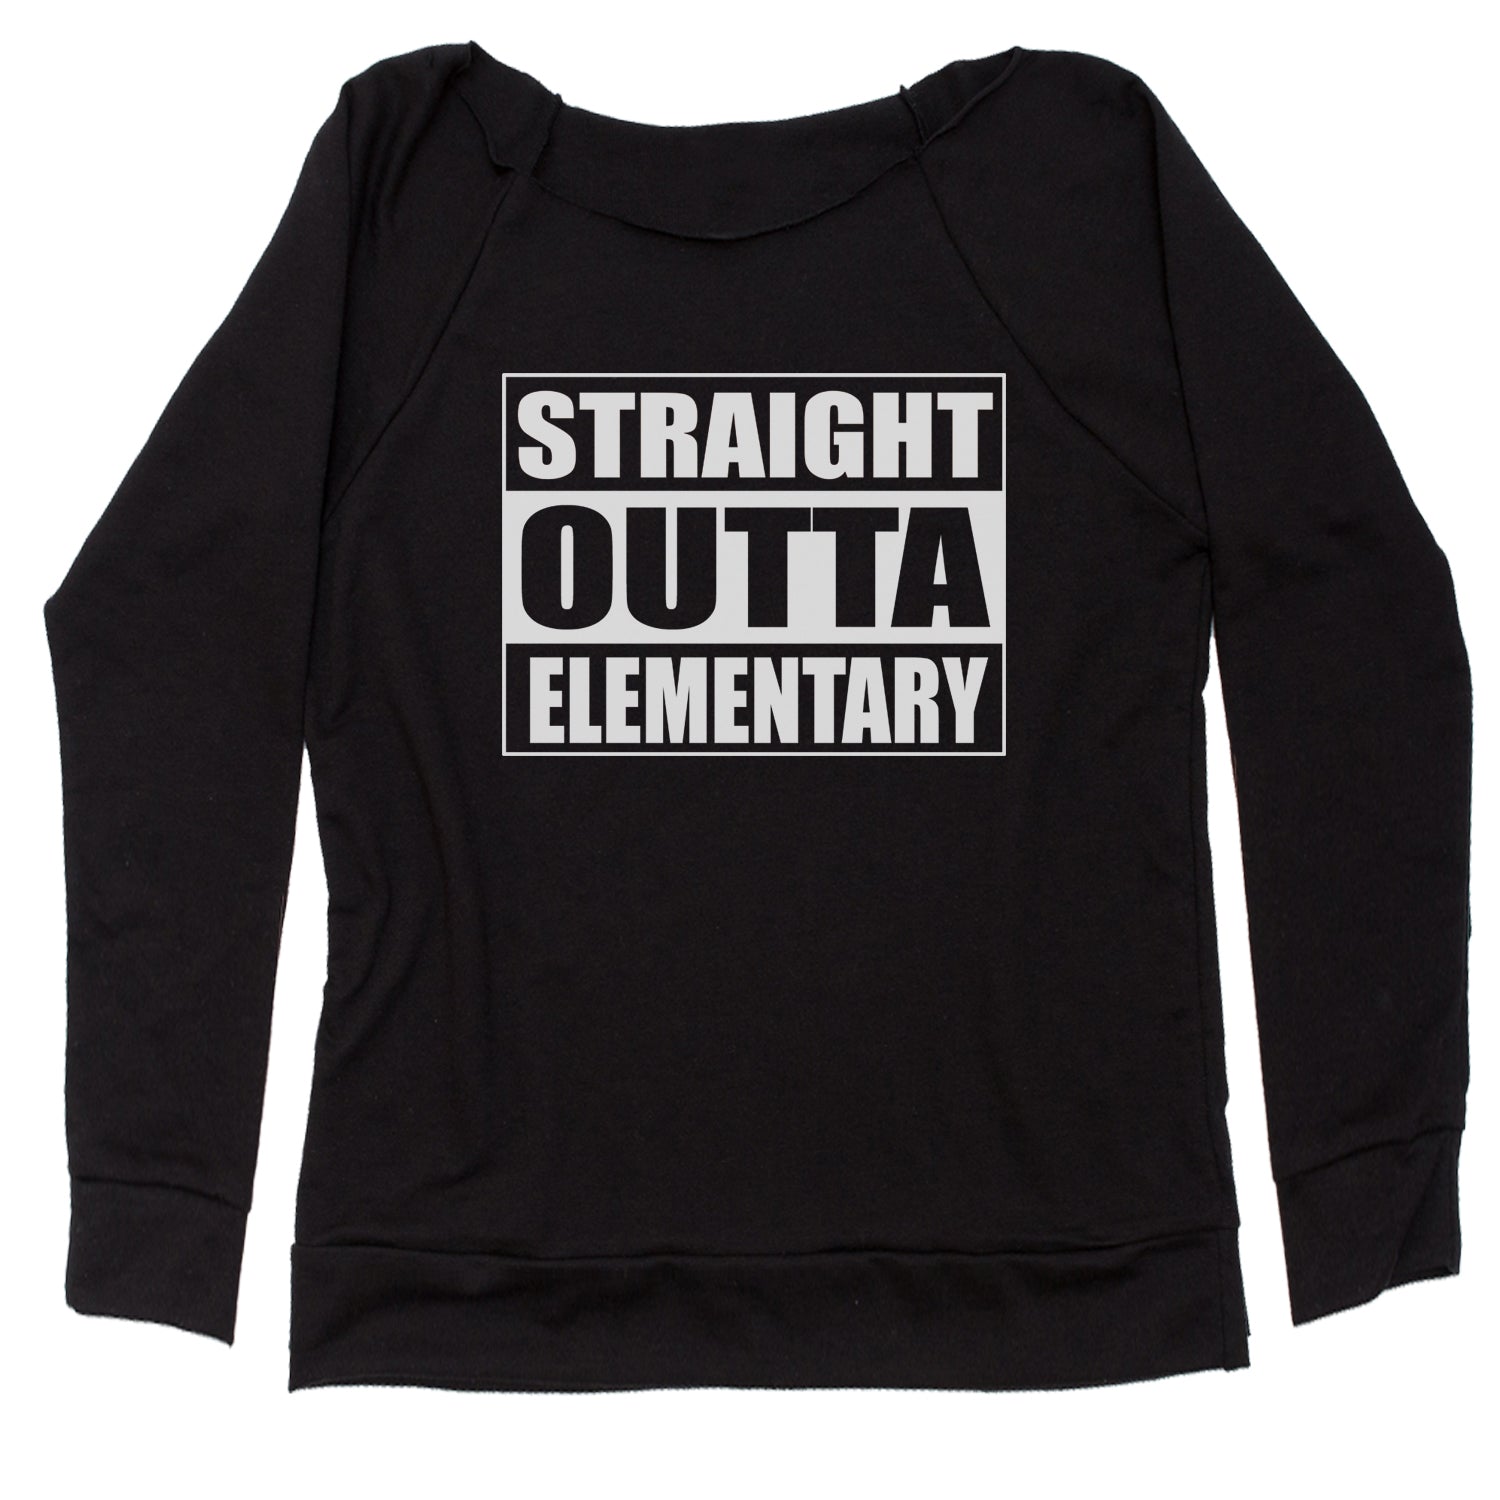 Straight Outta Elementary Slouchy Off Shoulder Sweatshirt 2020, 2021, 2022, class, of, quarantine, queen by Expression Tees